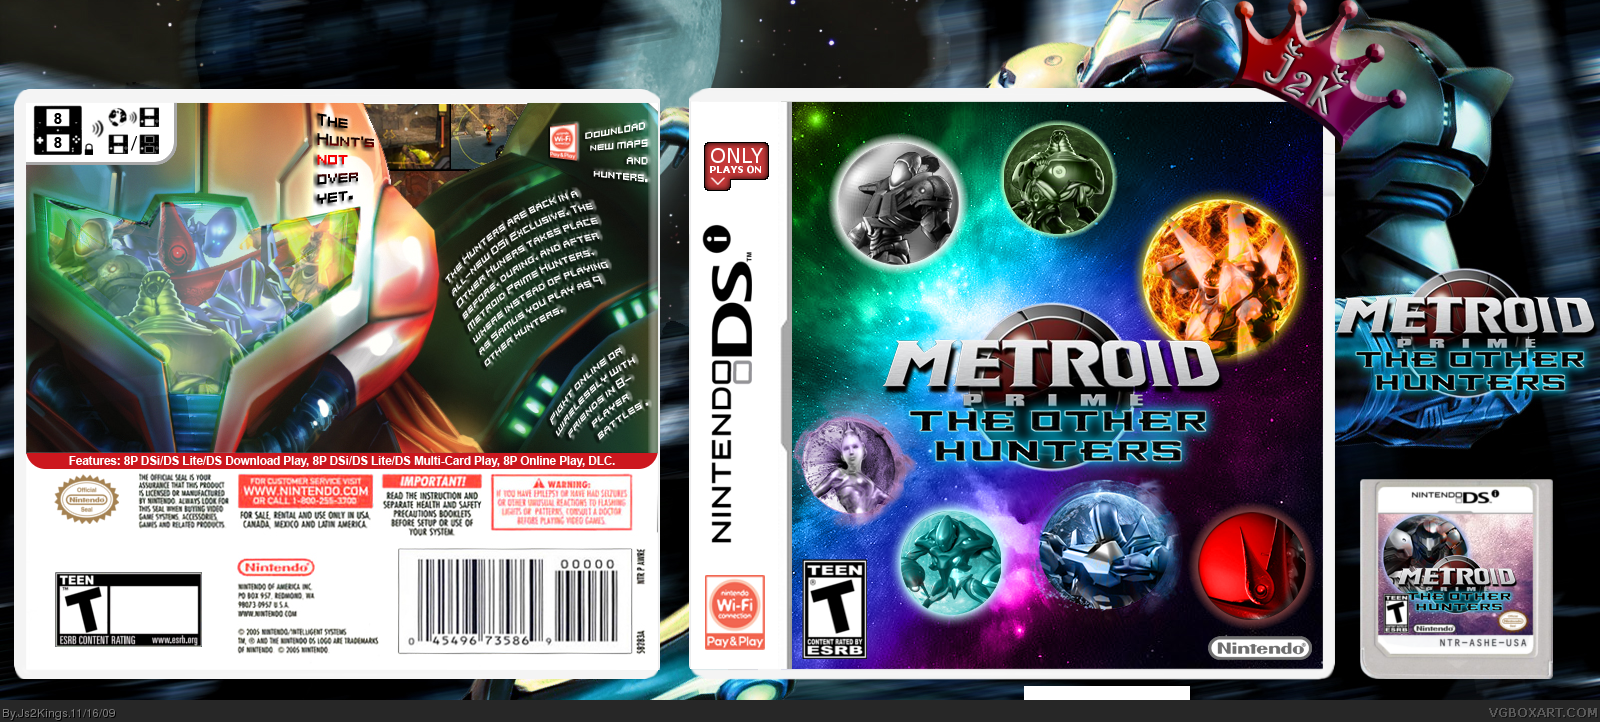 Metroid Prime: The Other Hunters box cover